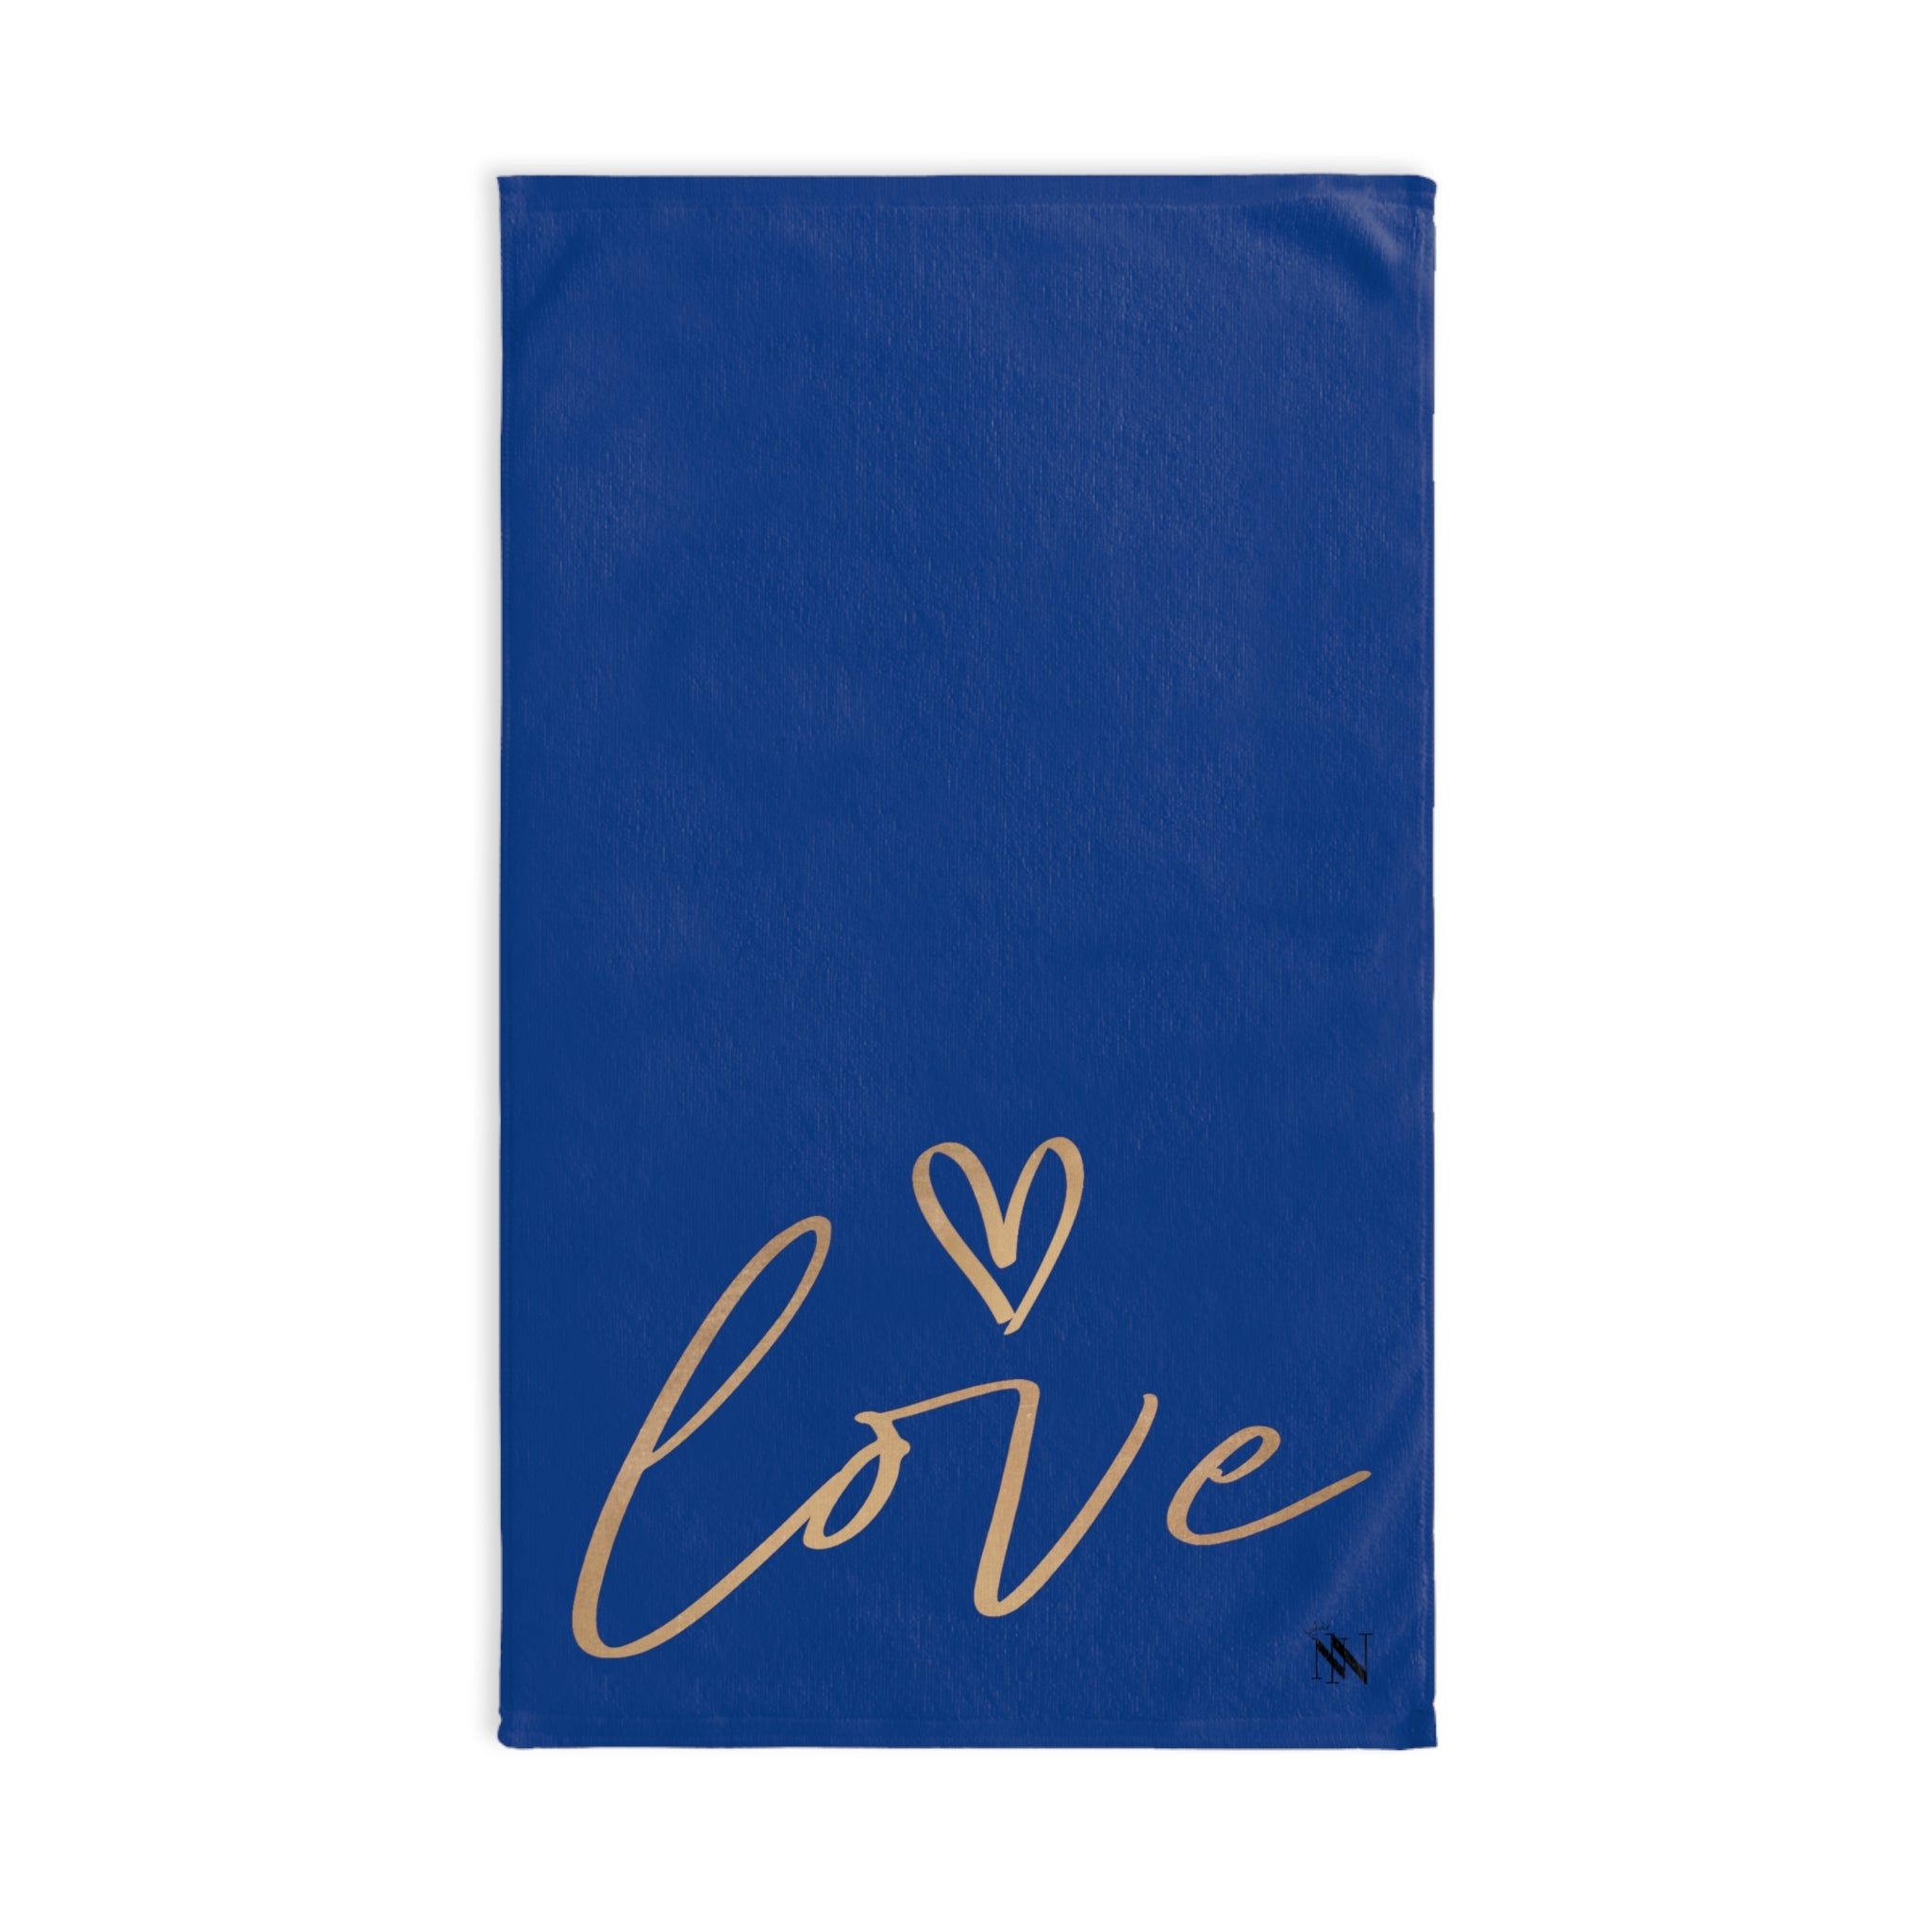 Gold Love Heart Blue | Gifts for Boyfriend, Funny Towel Romantic Gift for Wedding Couple Fiance First Year Anniversary Valentines, Party Gag Gifts, Joke Humor Cloth for Husband Men BF NECTAR NAPKINS